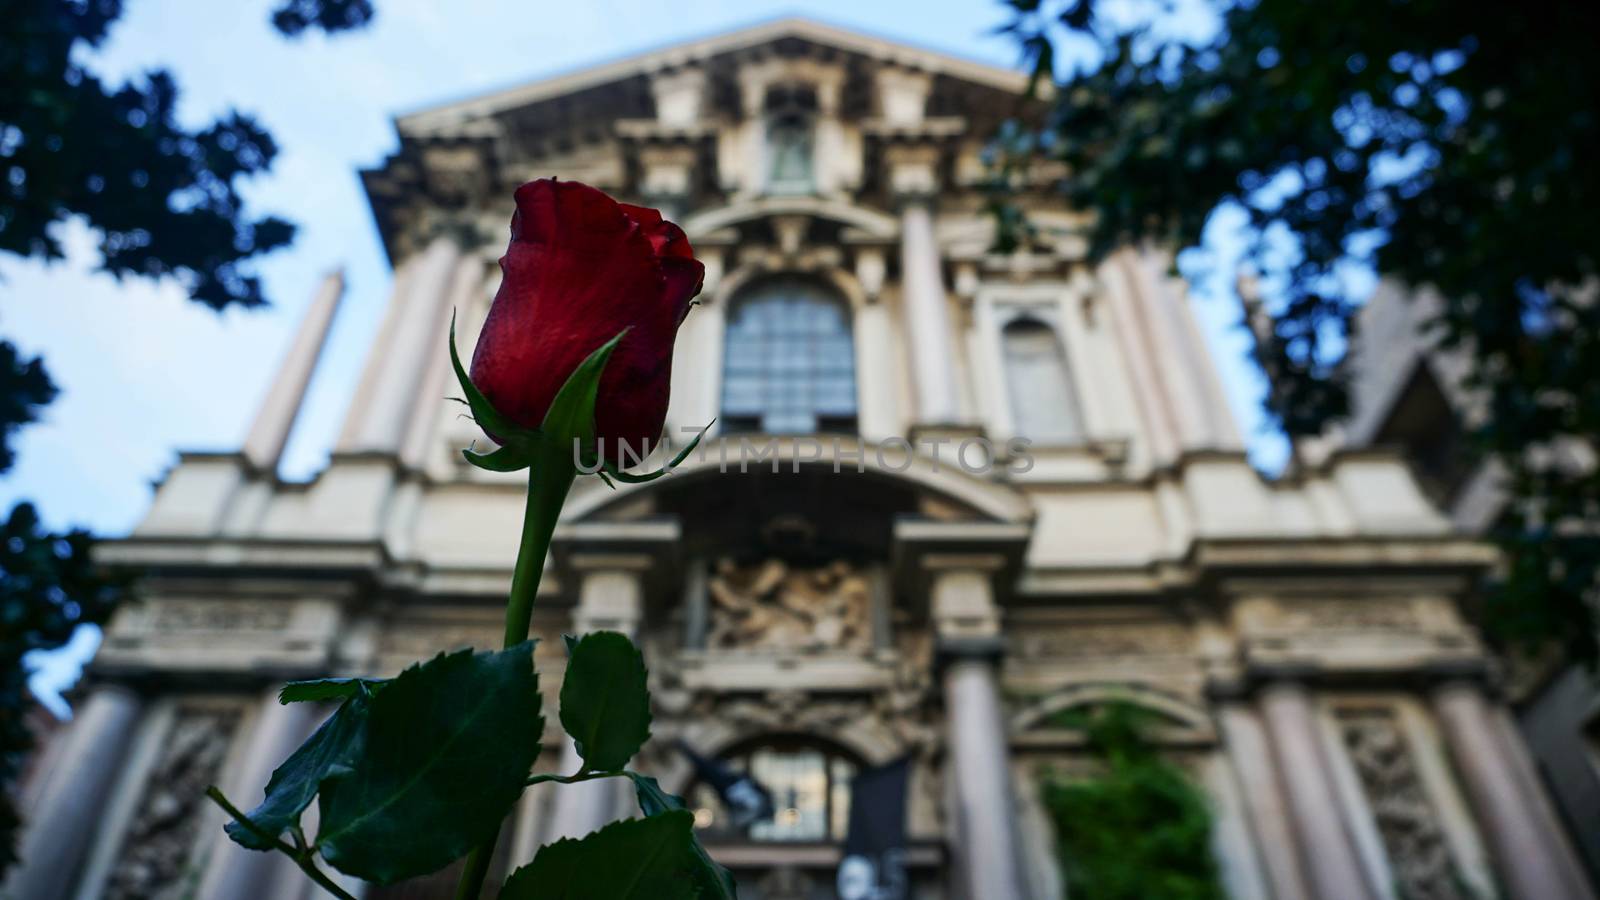 Beautiful rose blooming behind ancient building in Roman style in Milan by natali_brill